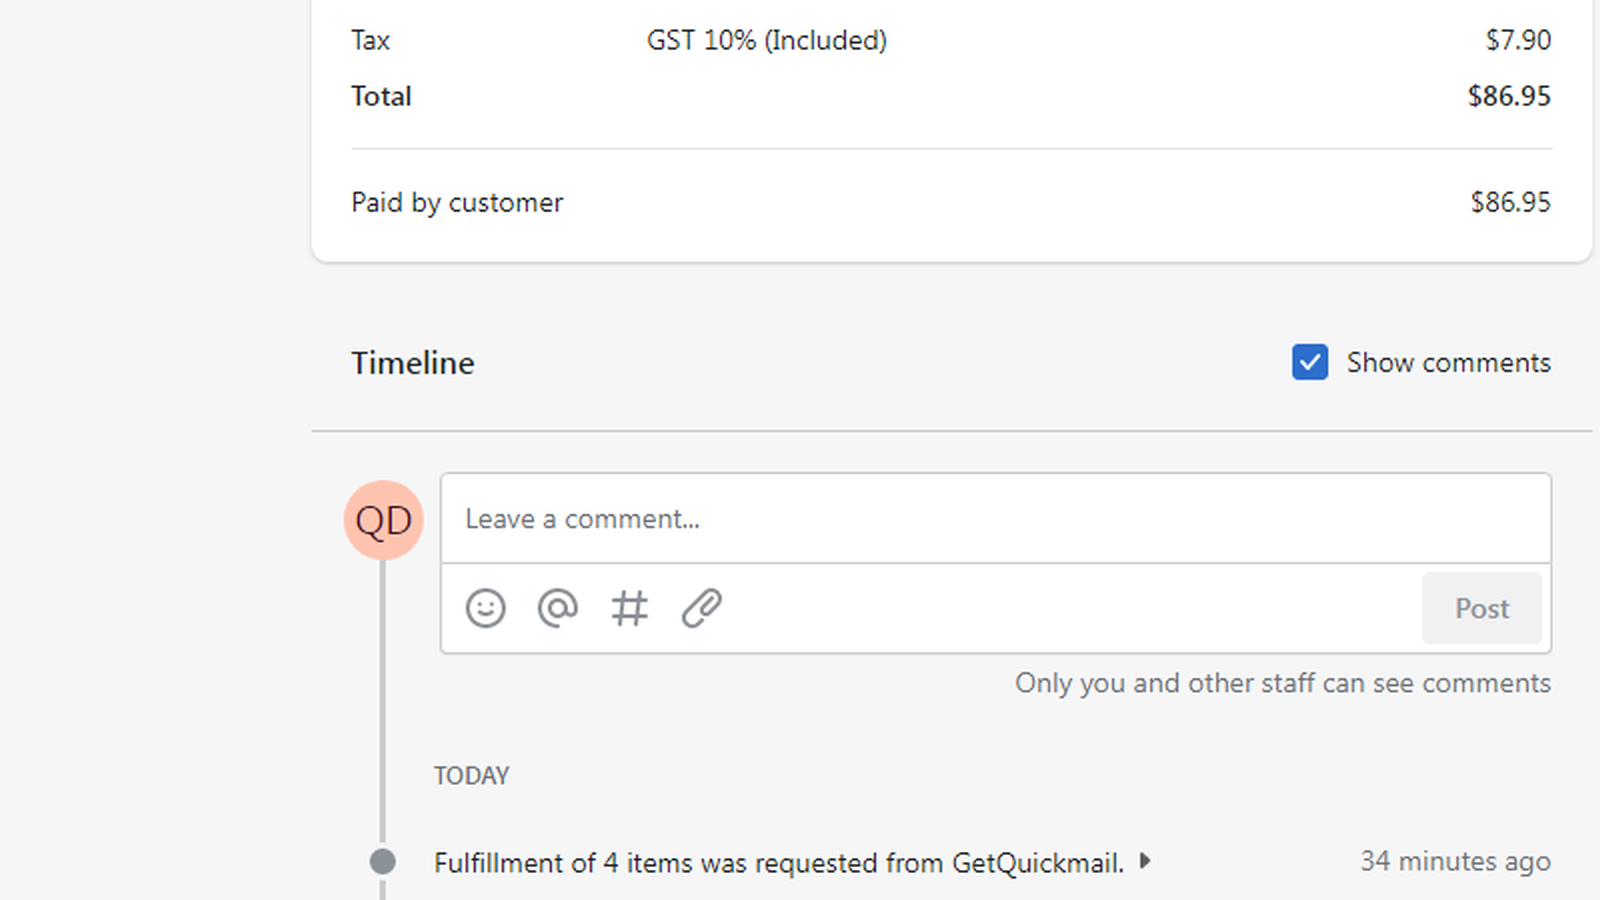 An order fulfilled using GetQuickmail